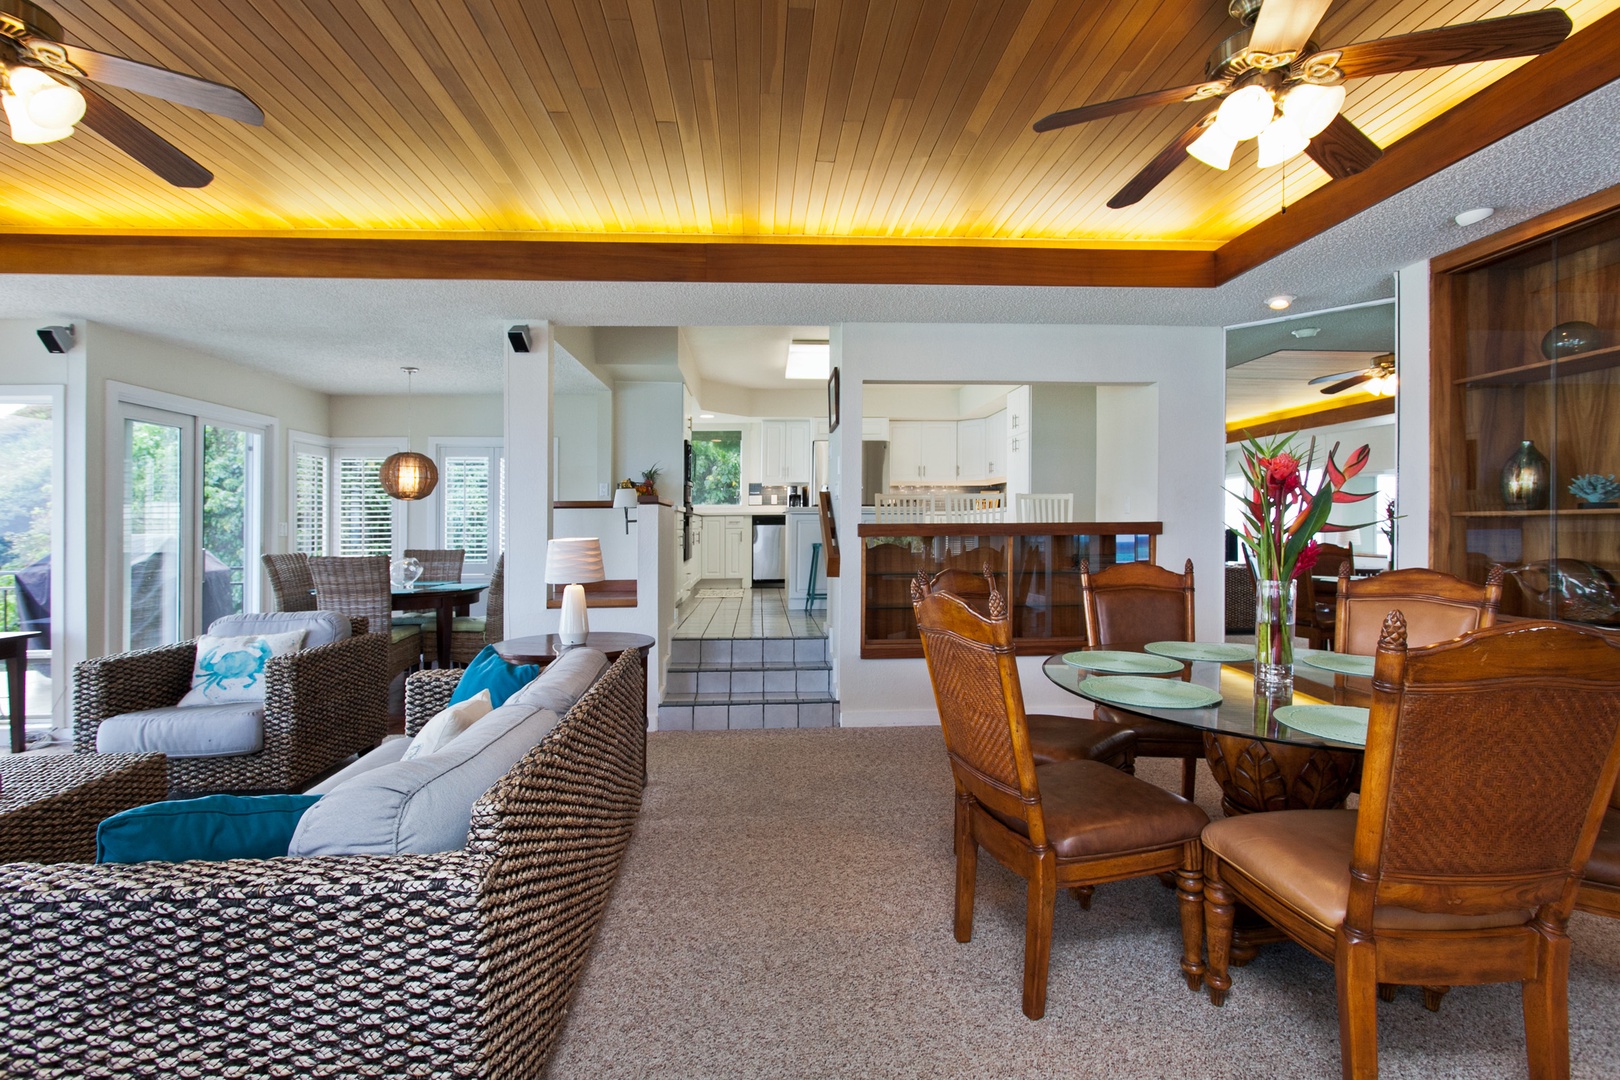 Kailua Vacation Rentals, Hale Kolea* - Experience seamless living with our open floor plan that flows naturally from mealtime to relaxation.